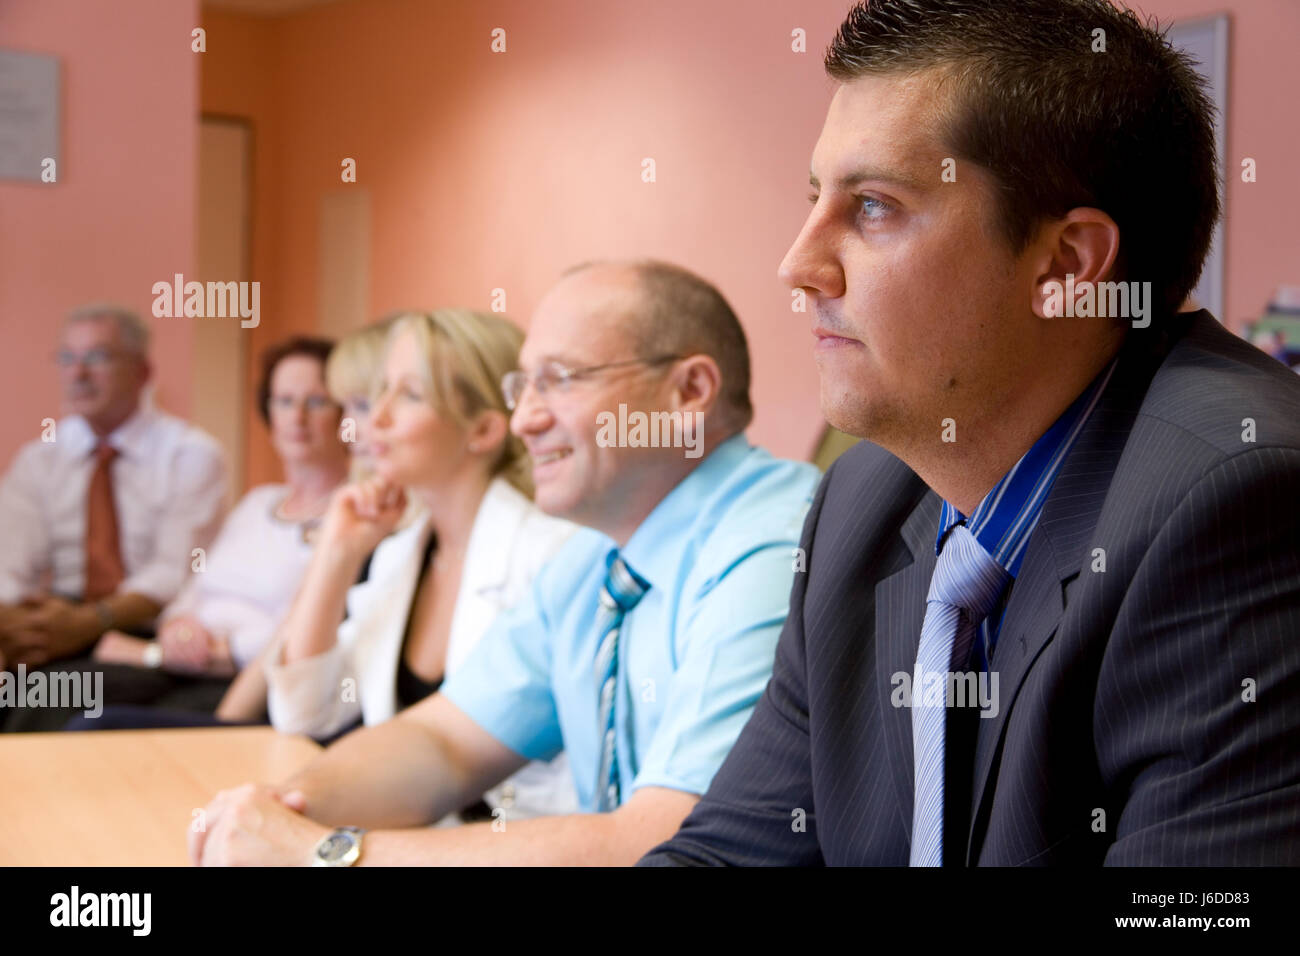 conference Stock Photo